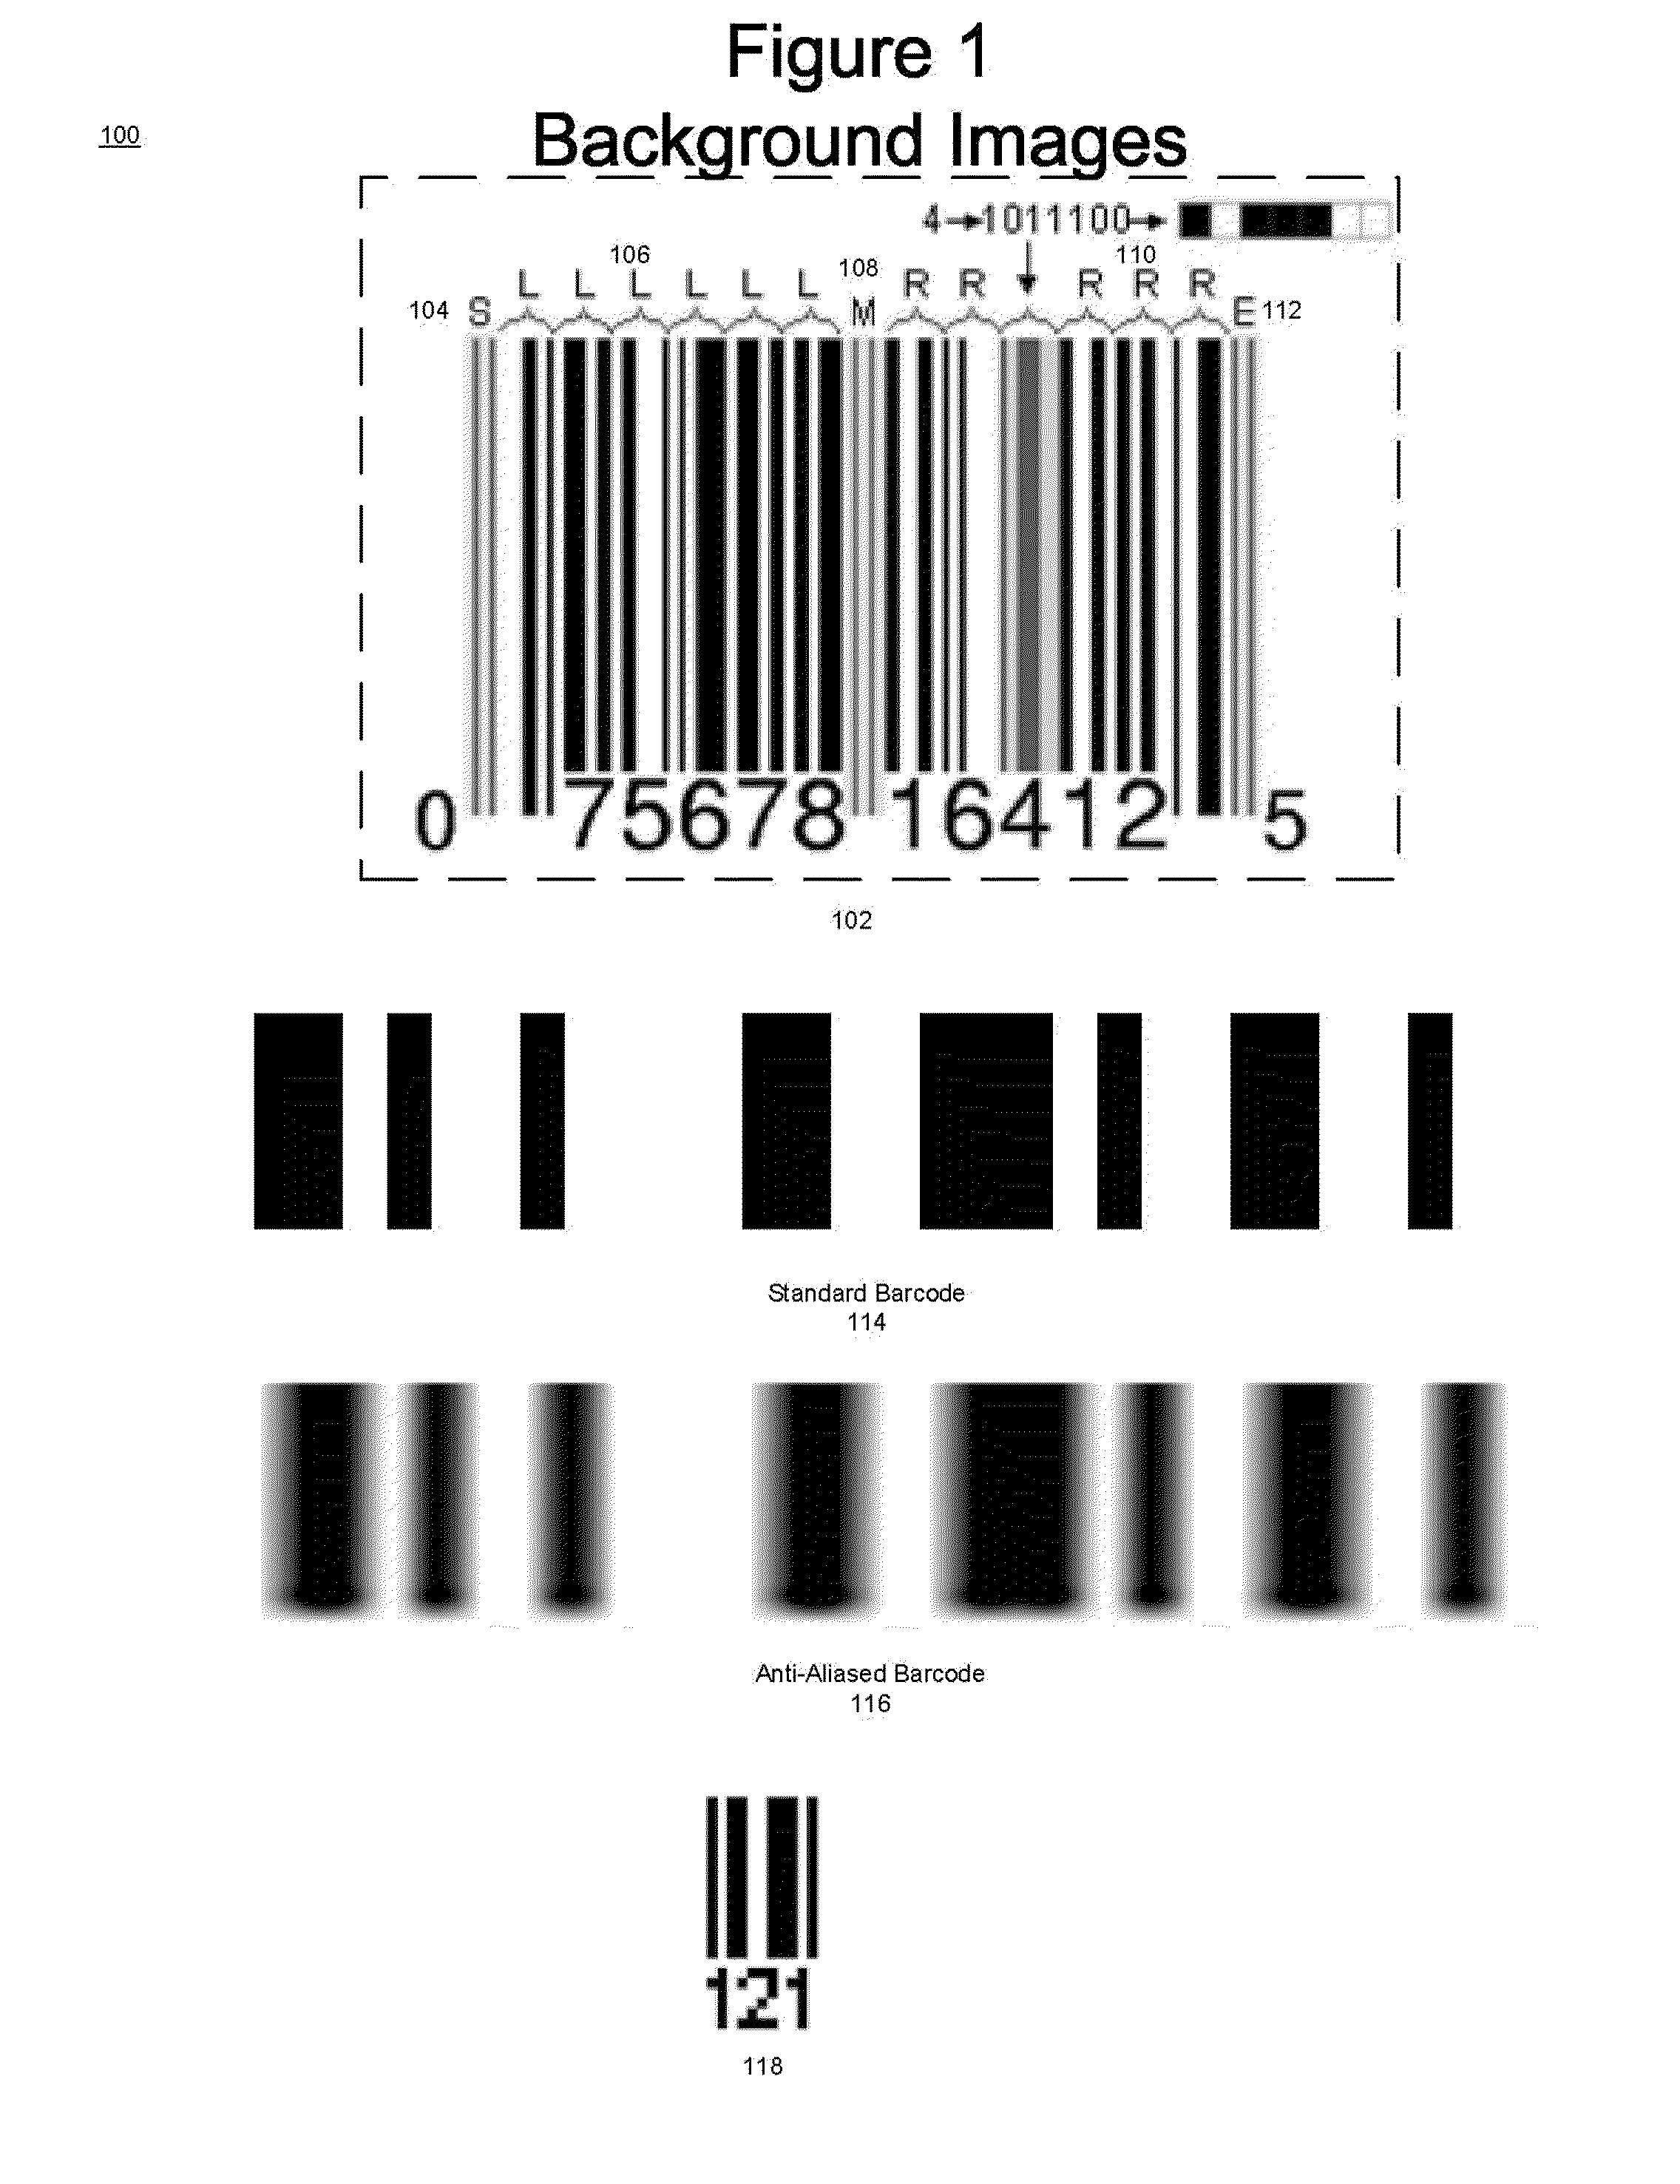 Customizing Barcode Images for Particular Displays